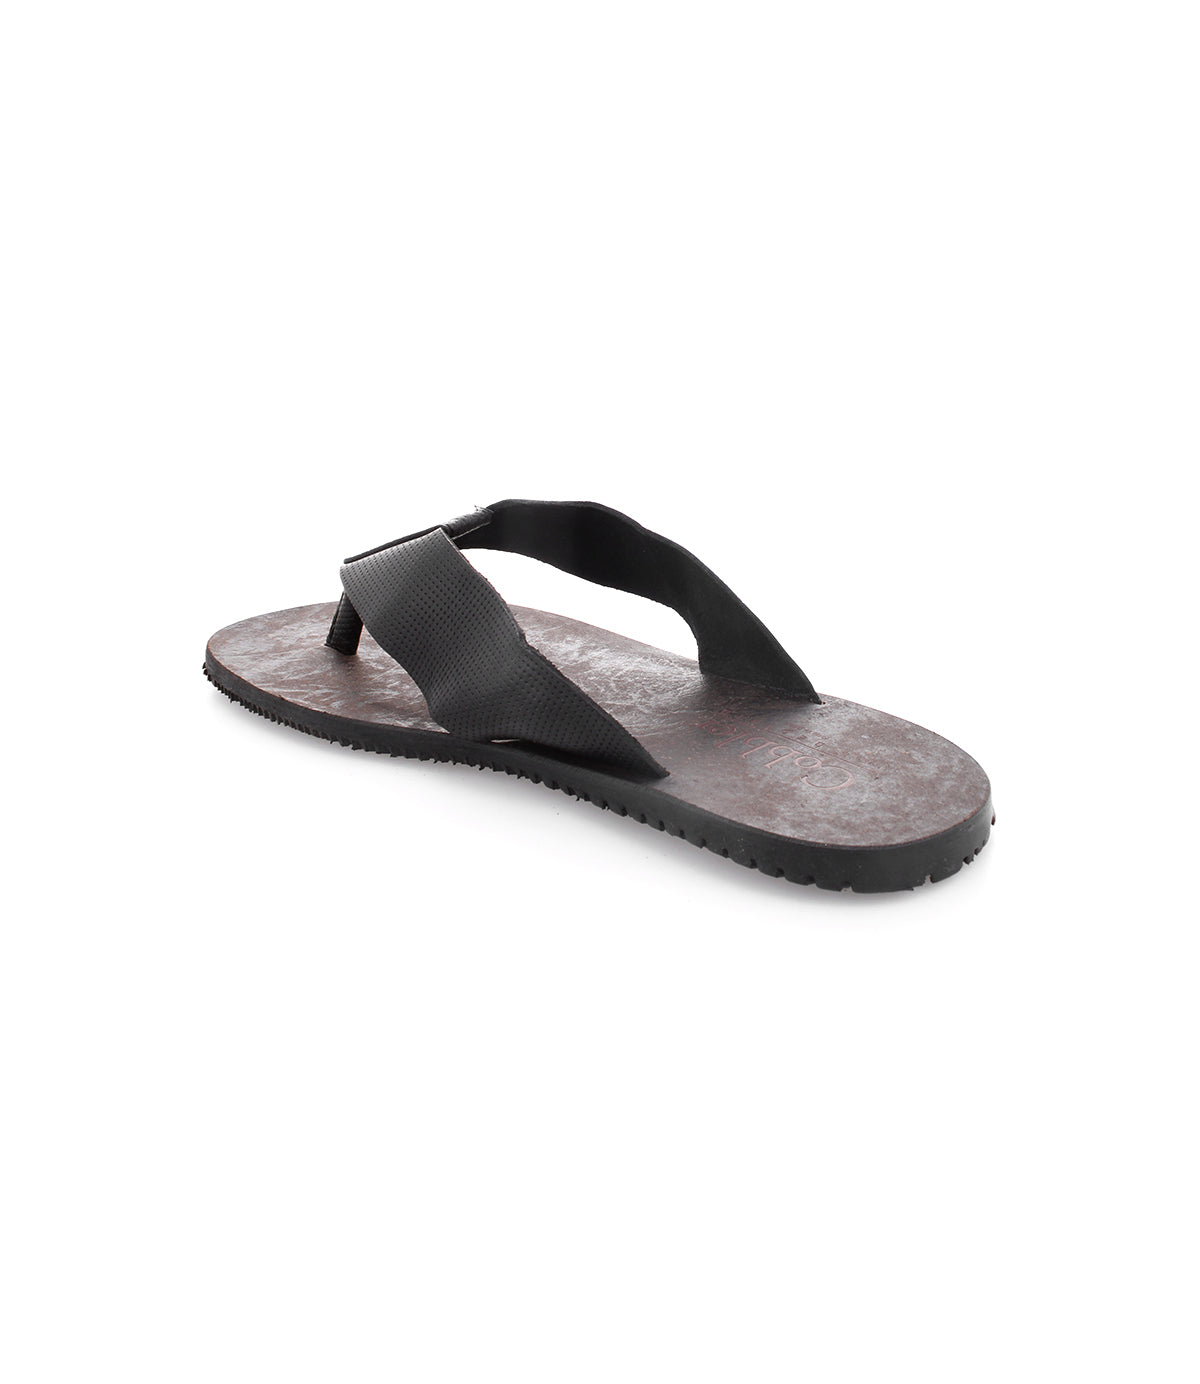 A pair of comfortable Bed Stu black leather flip flops on a white background.